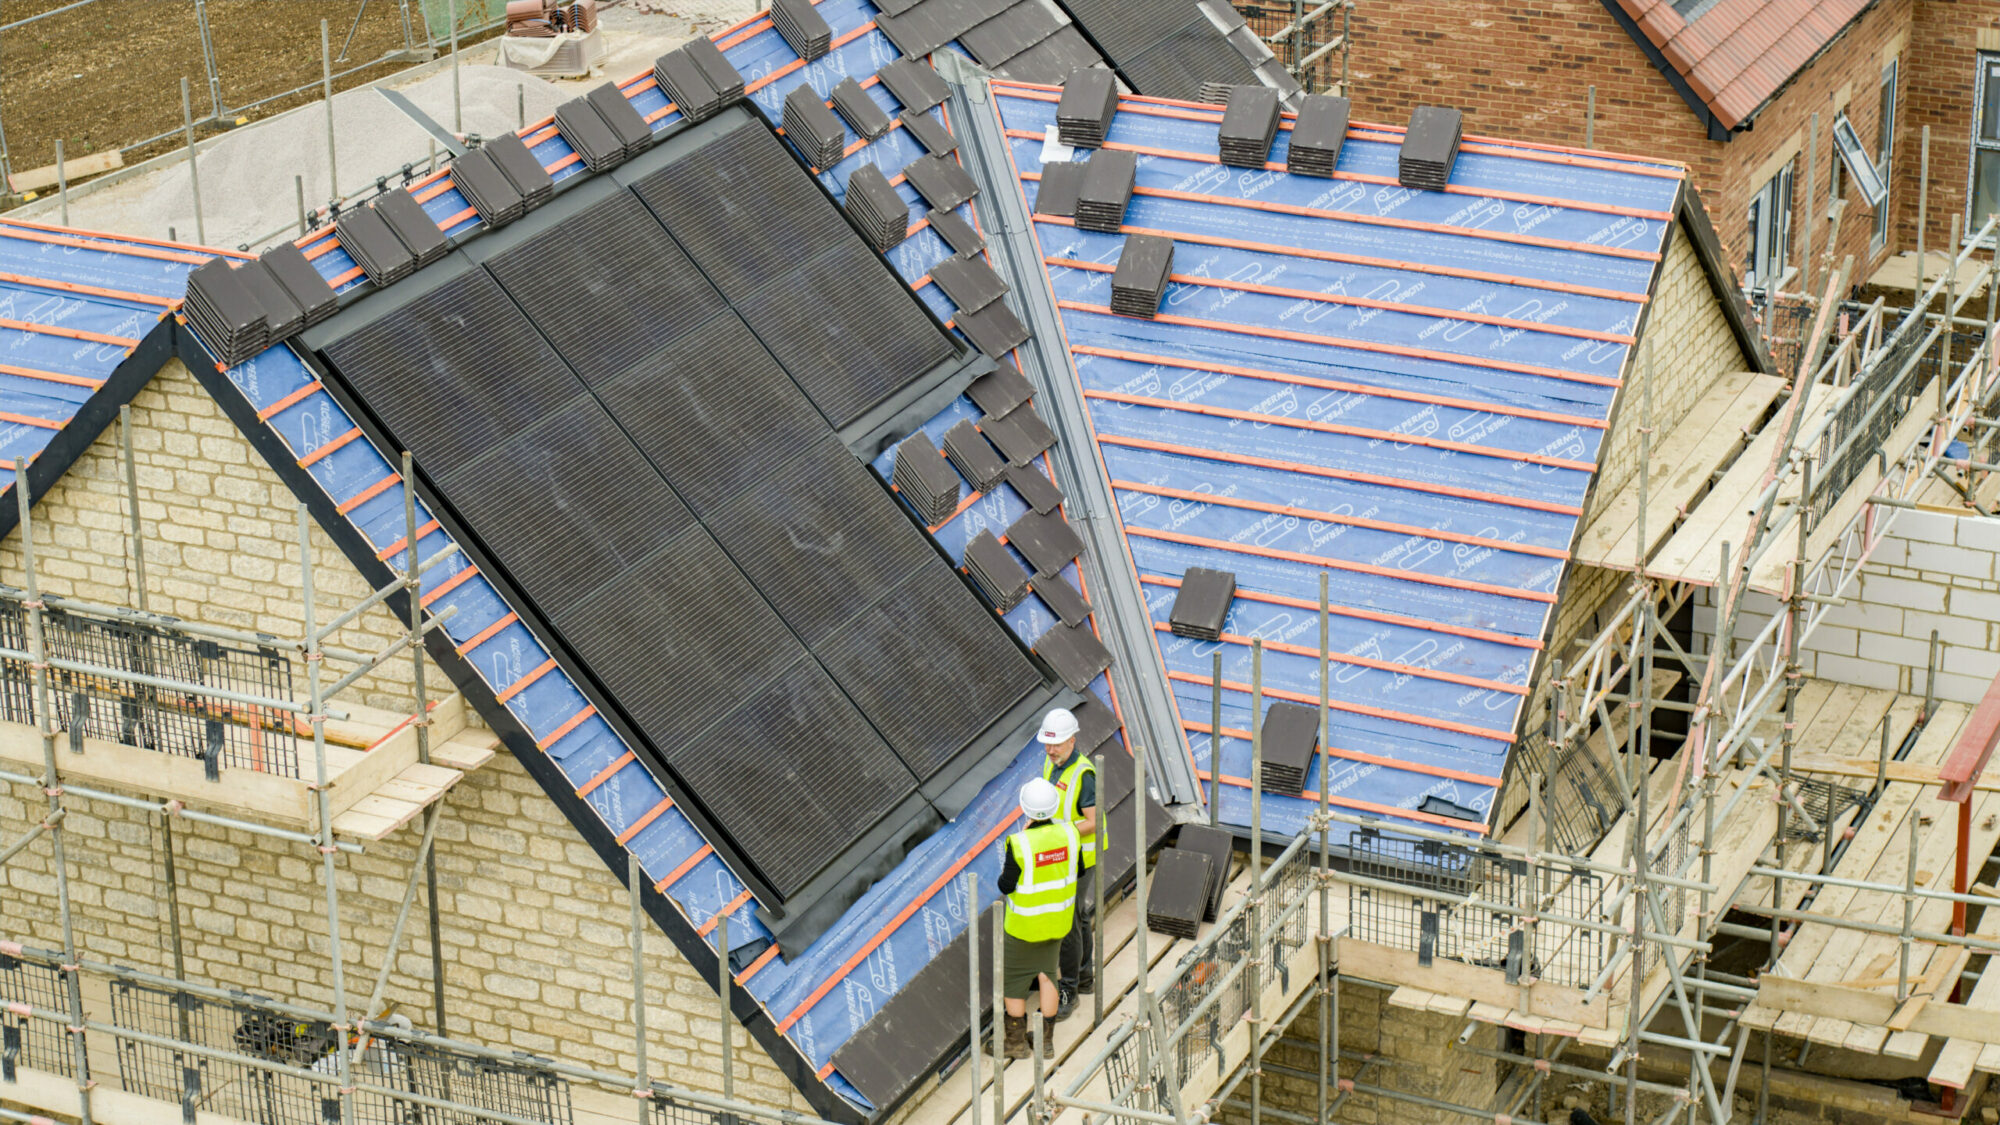 Solar PV is used to harness the sun's energy and turn into power for our homeowners